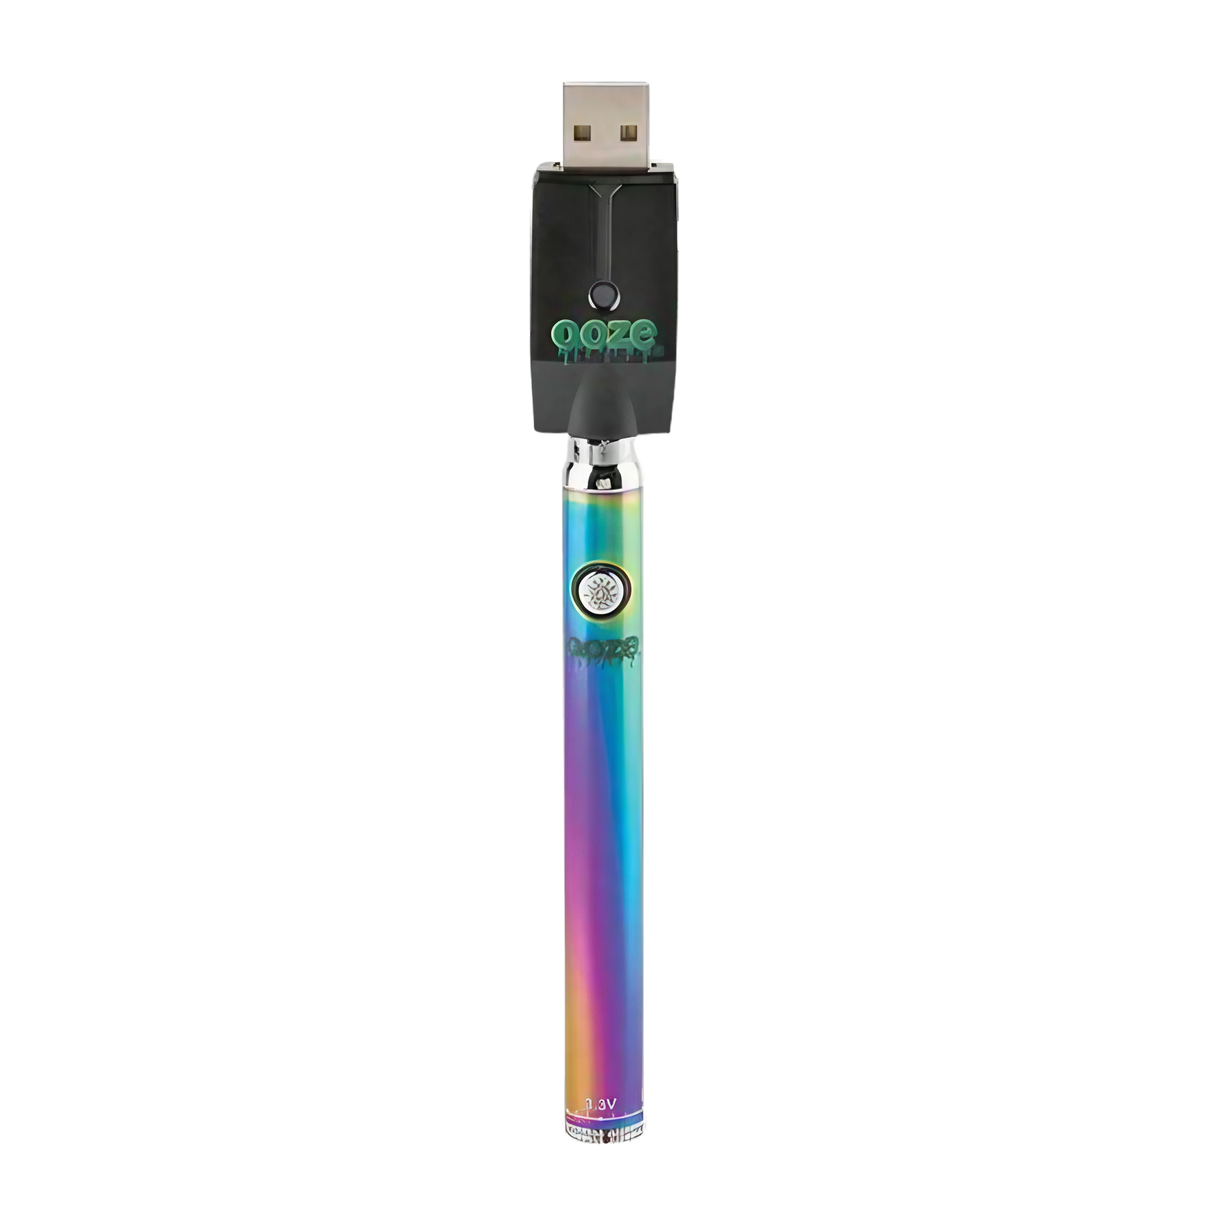 Ooze Slim Twist Battery in Rainbow with USB Charger, 510 Thread for Vaporizers, Front View